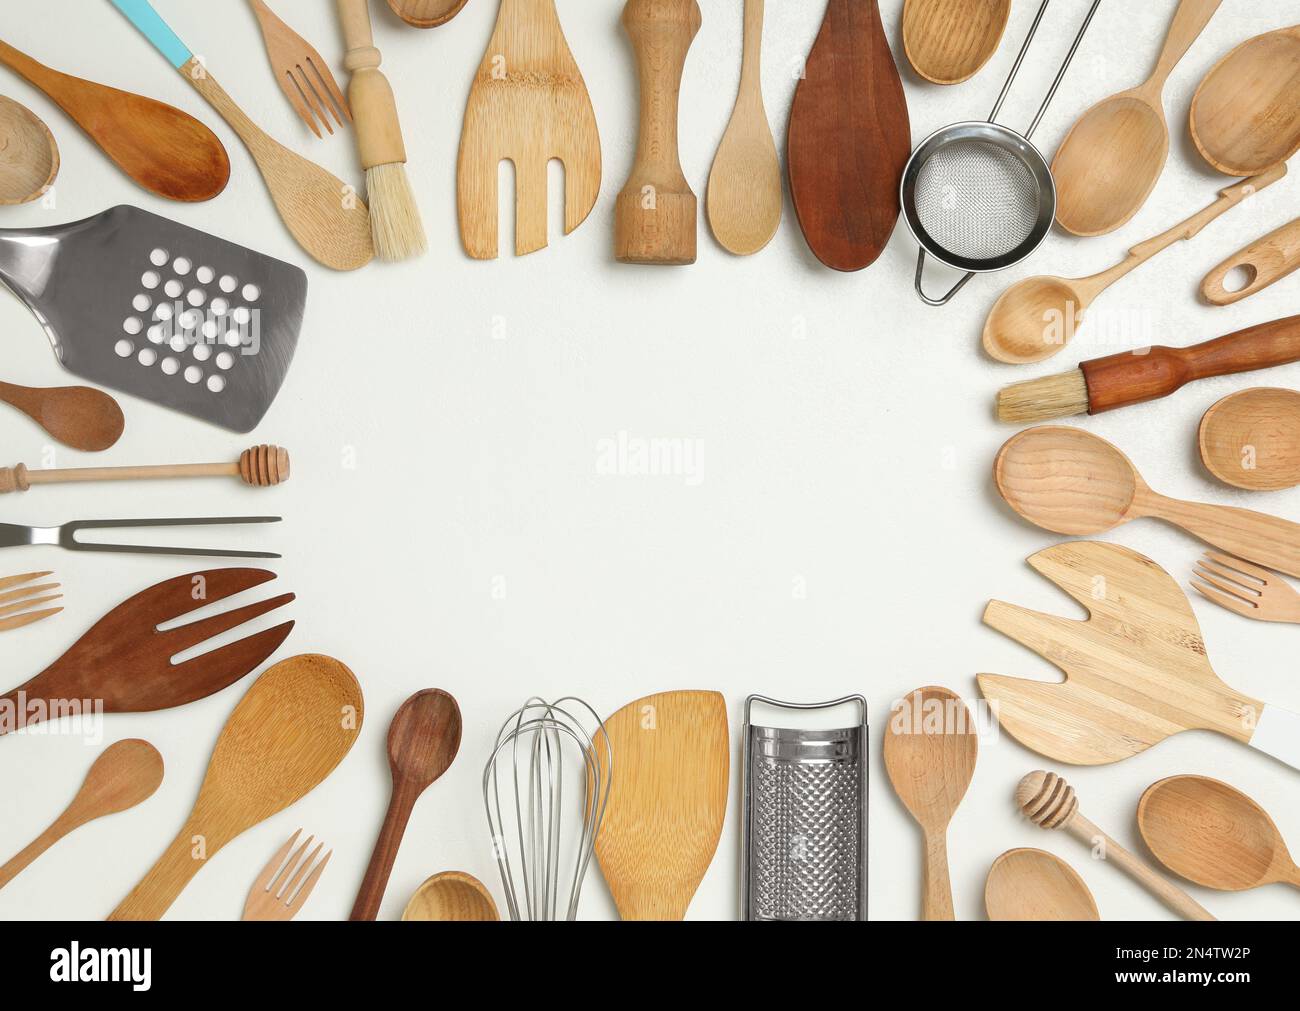 https://c8.alamy.com/comp/2N4TW2P/frame-of-cooking-utensils-on-white-background-flat-lay-space-for-text-2N4TW2P.jpg